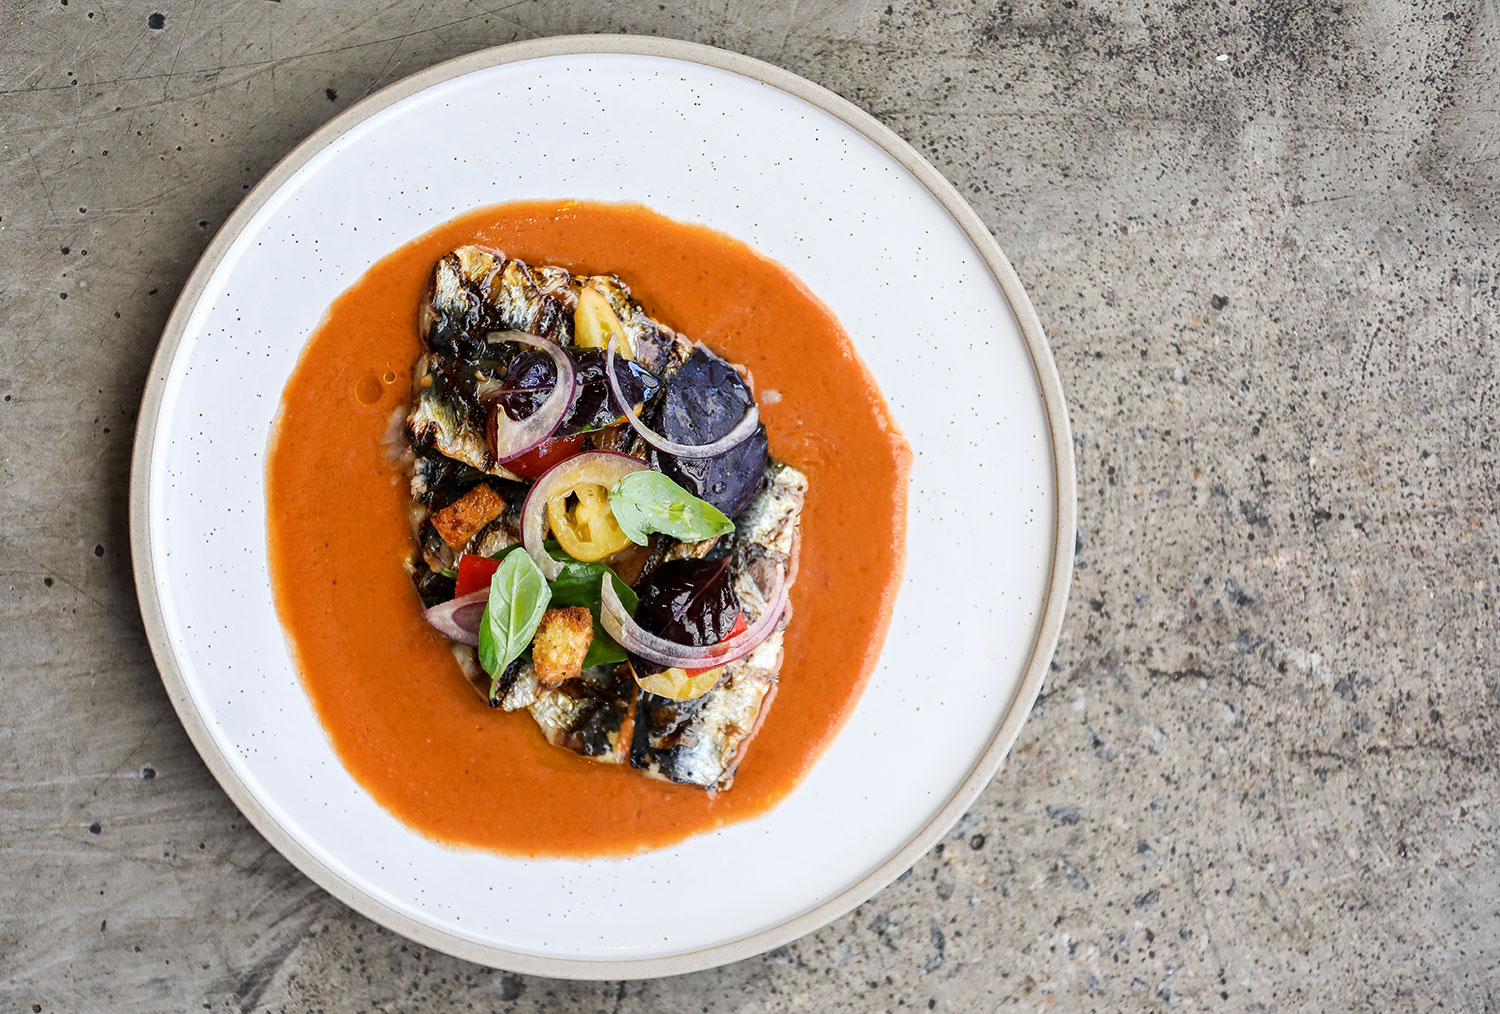 Grilled Sardines Fillets with gazpacho salad